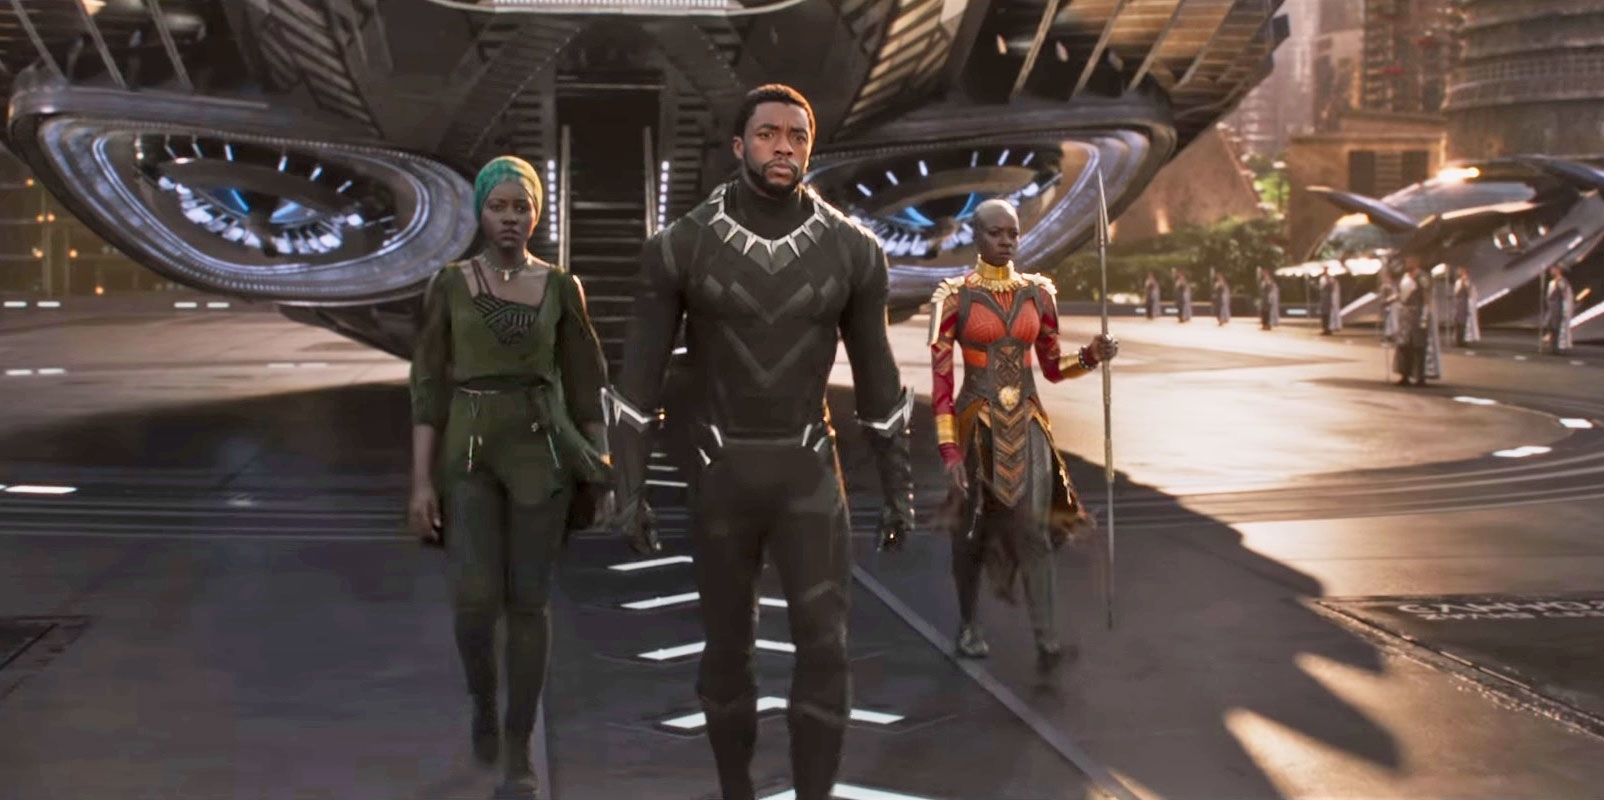 Marvel’s full ‘Black Panther’ trailer shows a ruthless hero-king | DeviceDaily.com